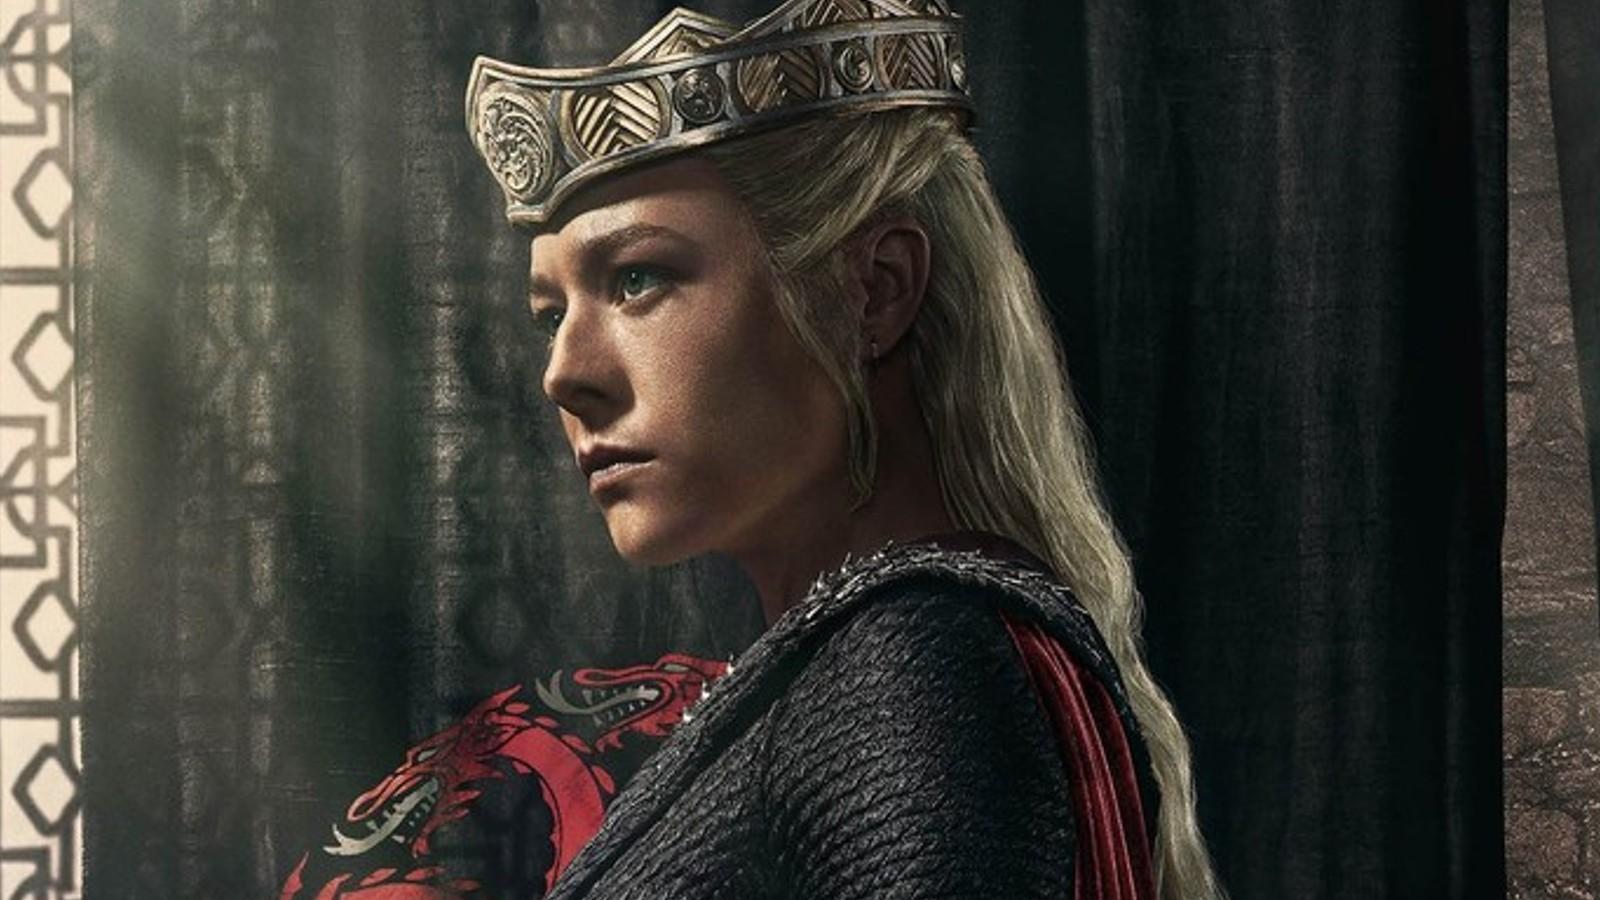 Rhaenyra in House of the Dragon with the Targaryen sigil behind her